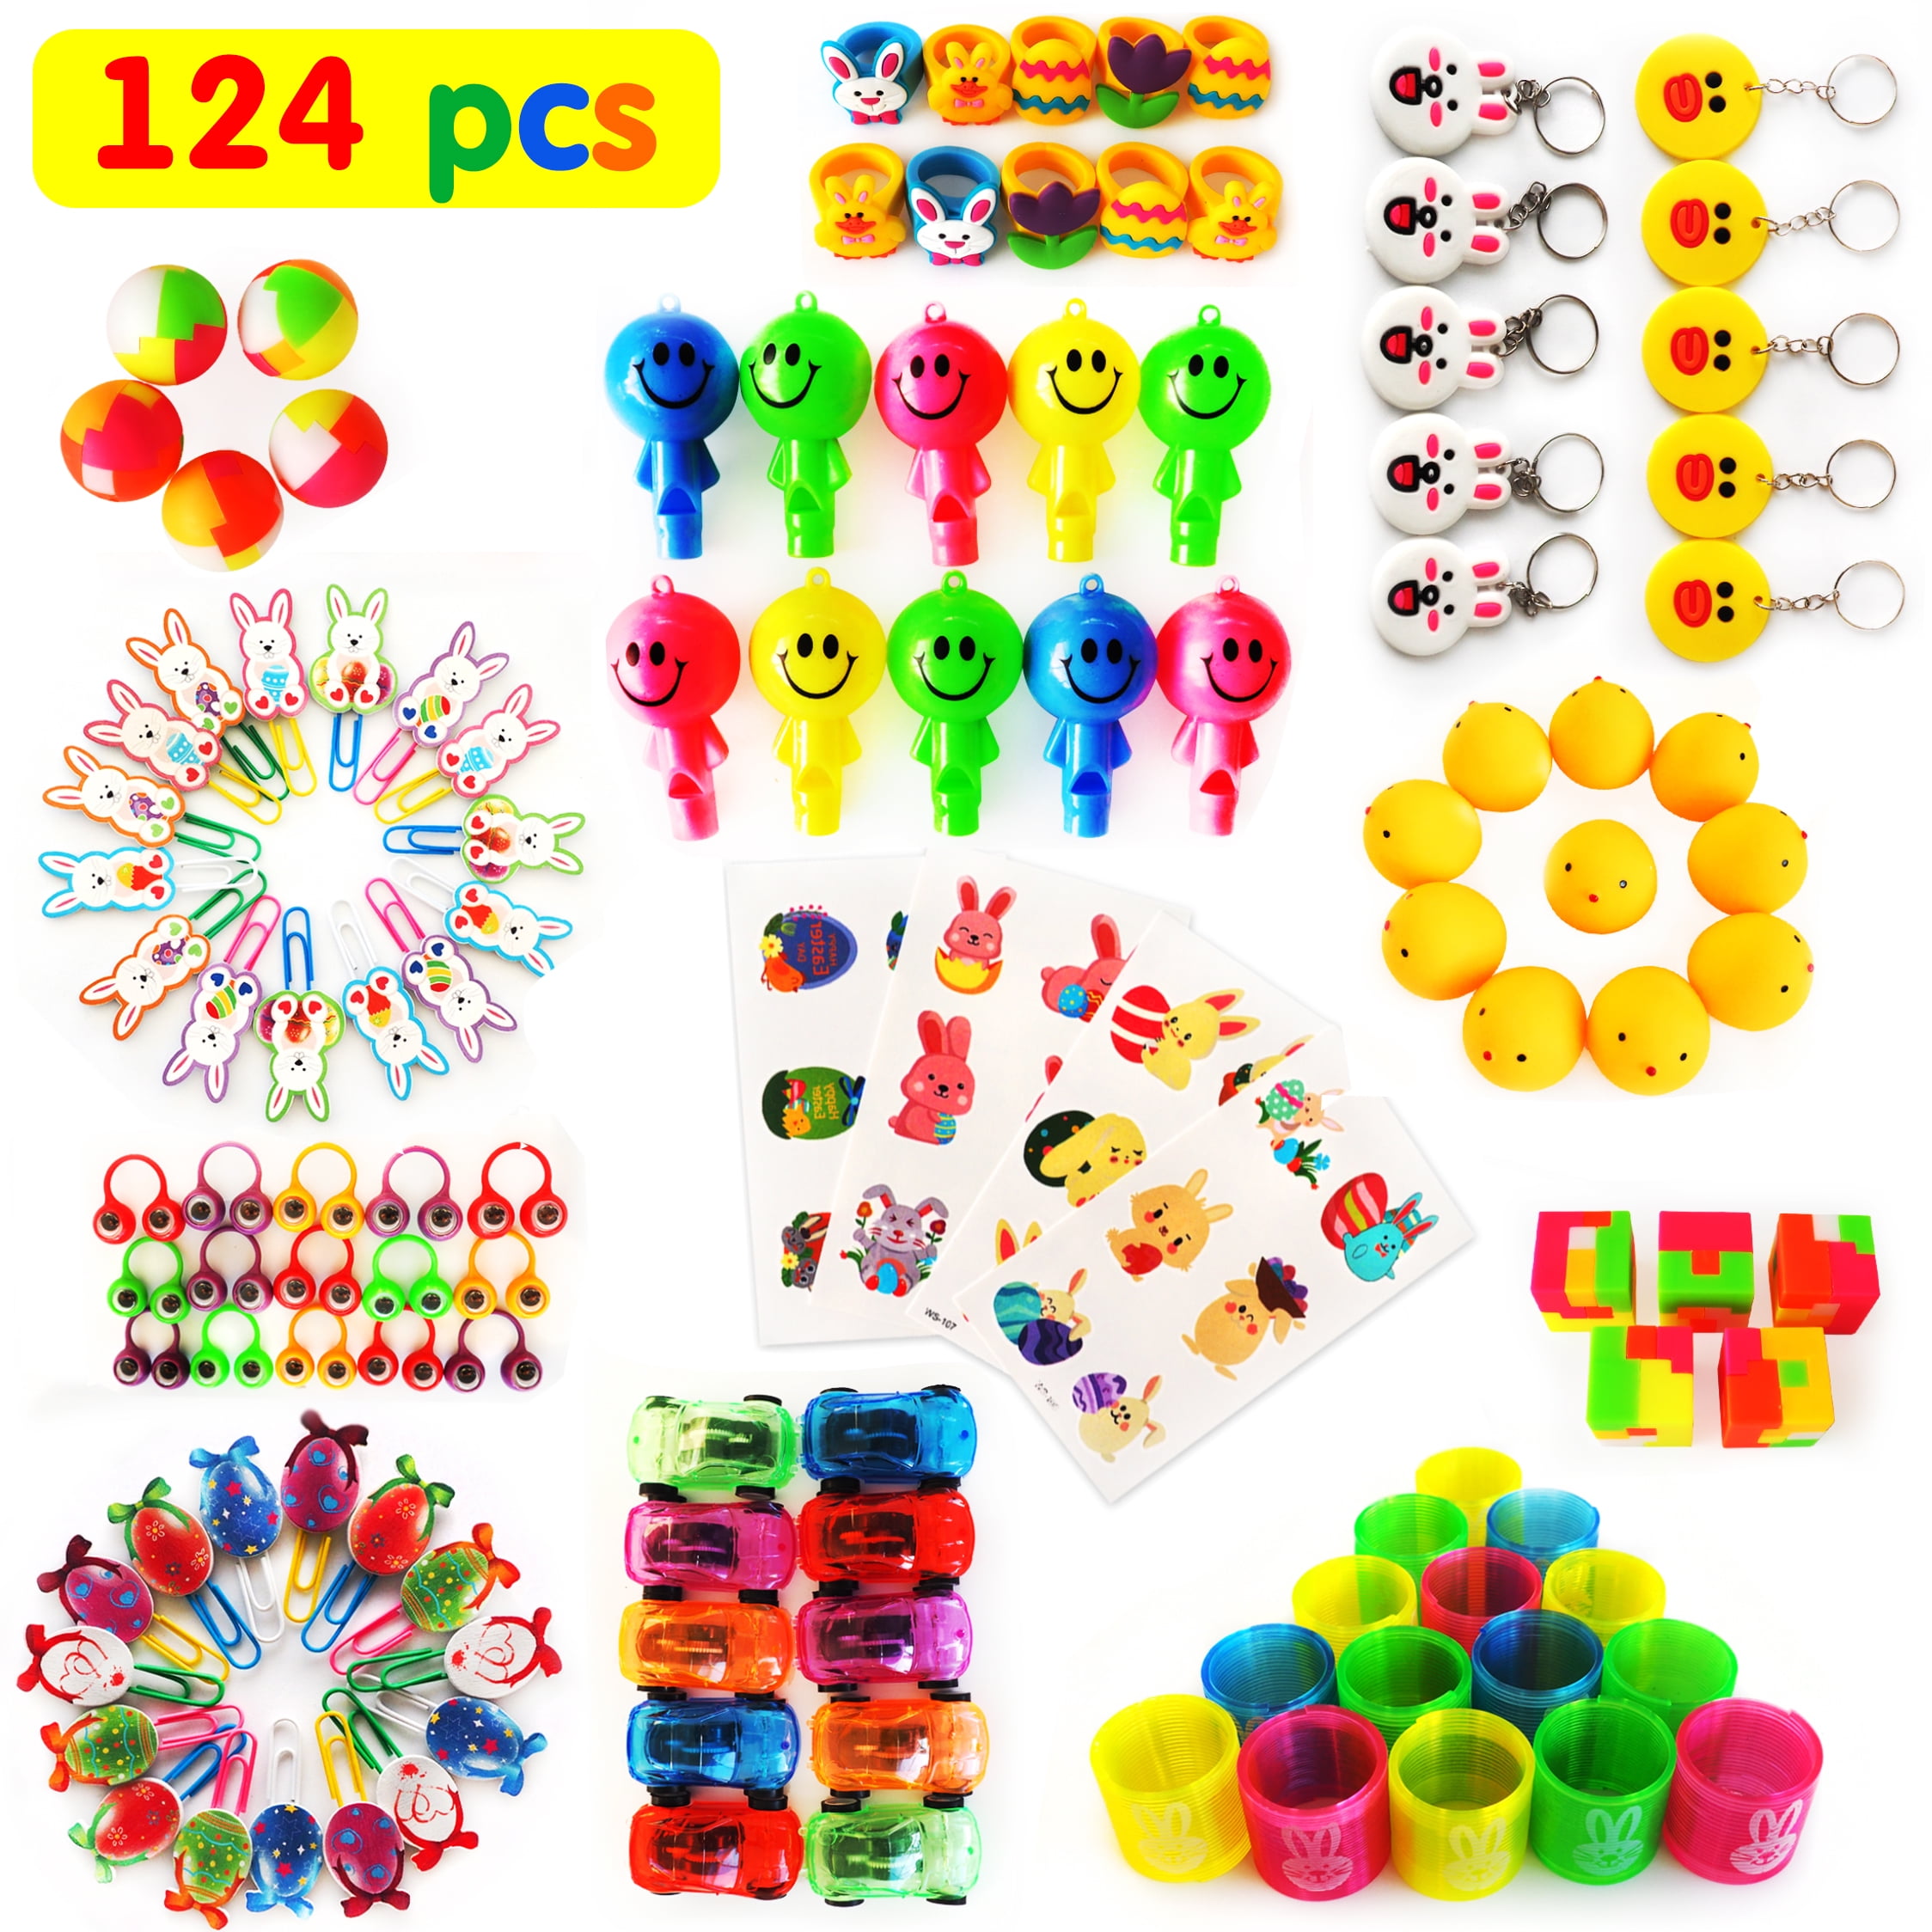 52 Pack Party Favors Toy Assortment Bundle for Kids,Birthday Bag Fillers Stocking Stuffers,Carnival Prizes School Classroom Rewards Treasure Box